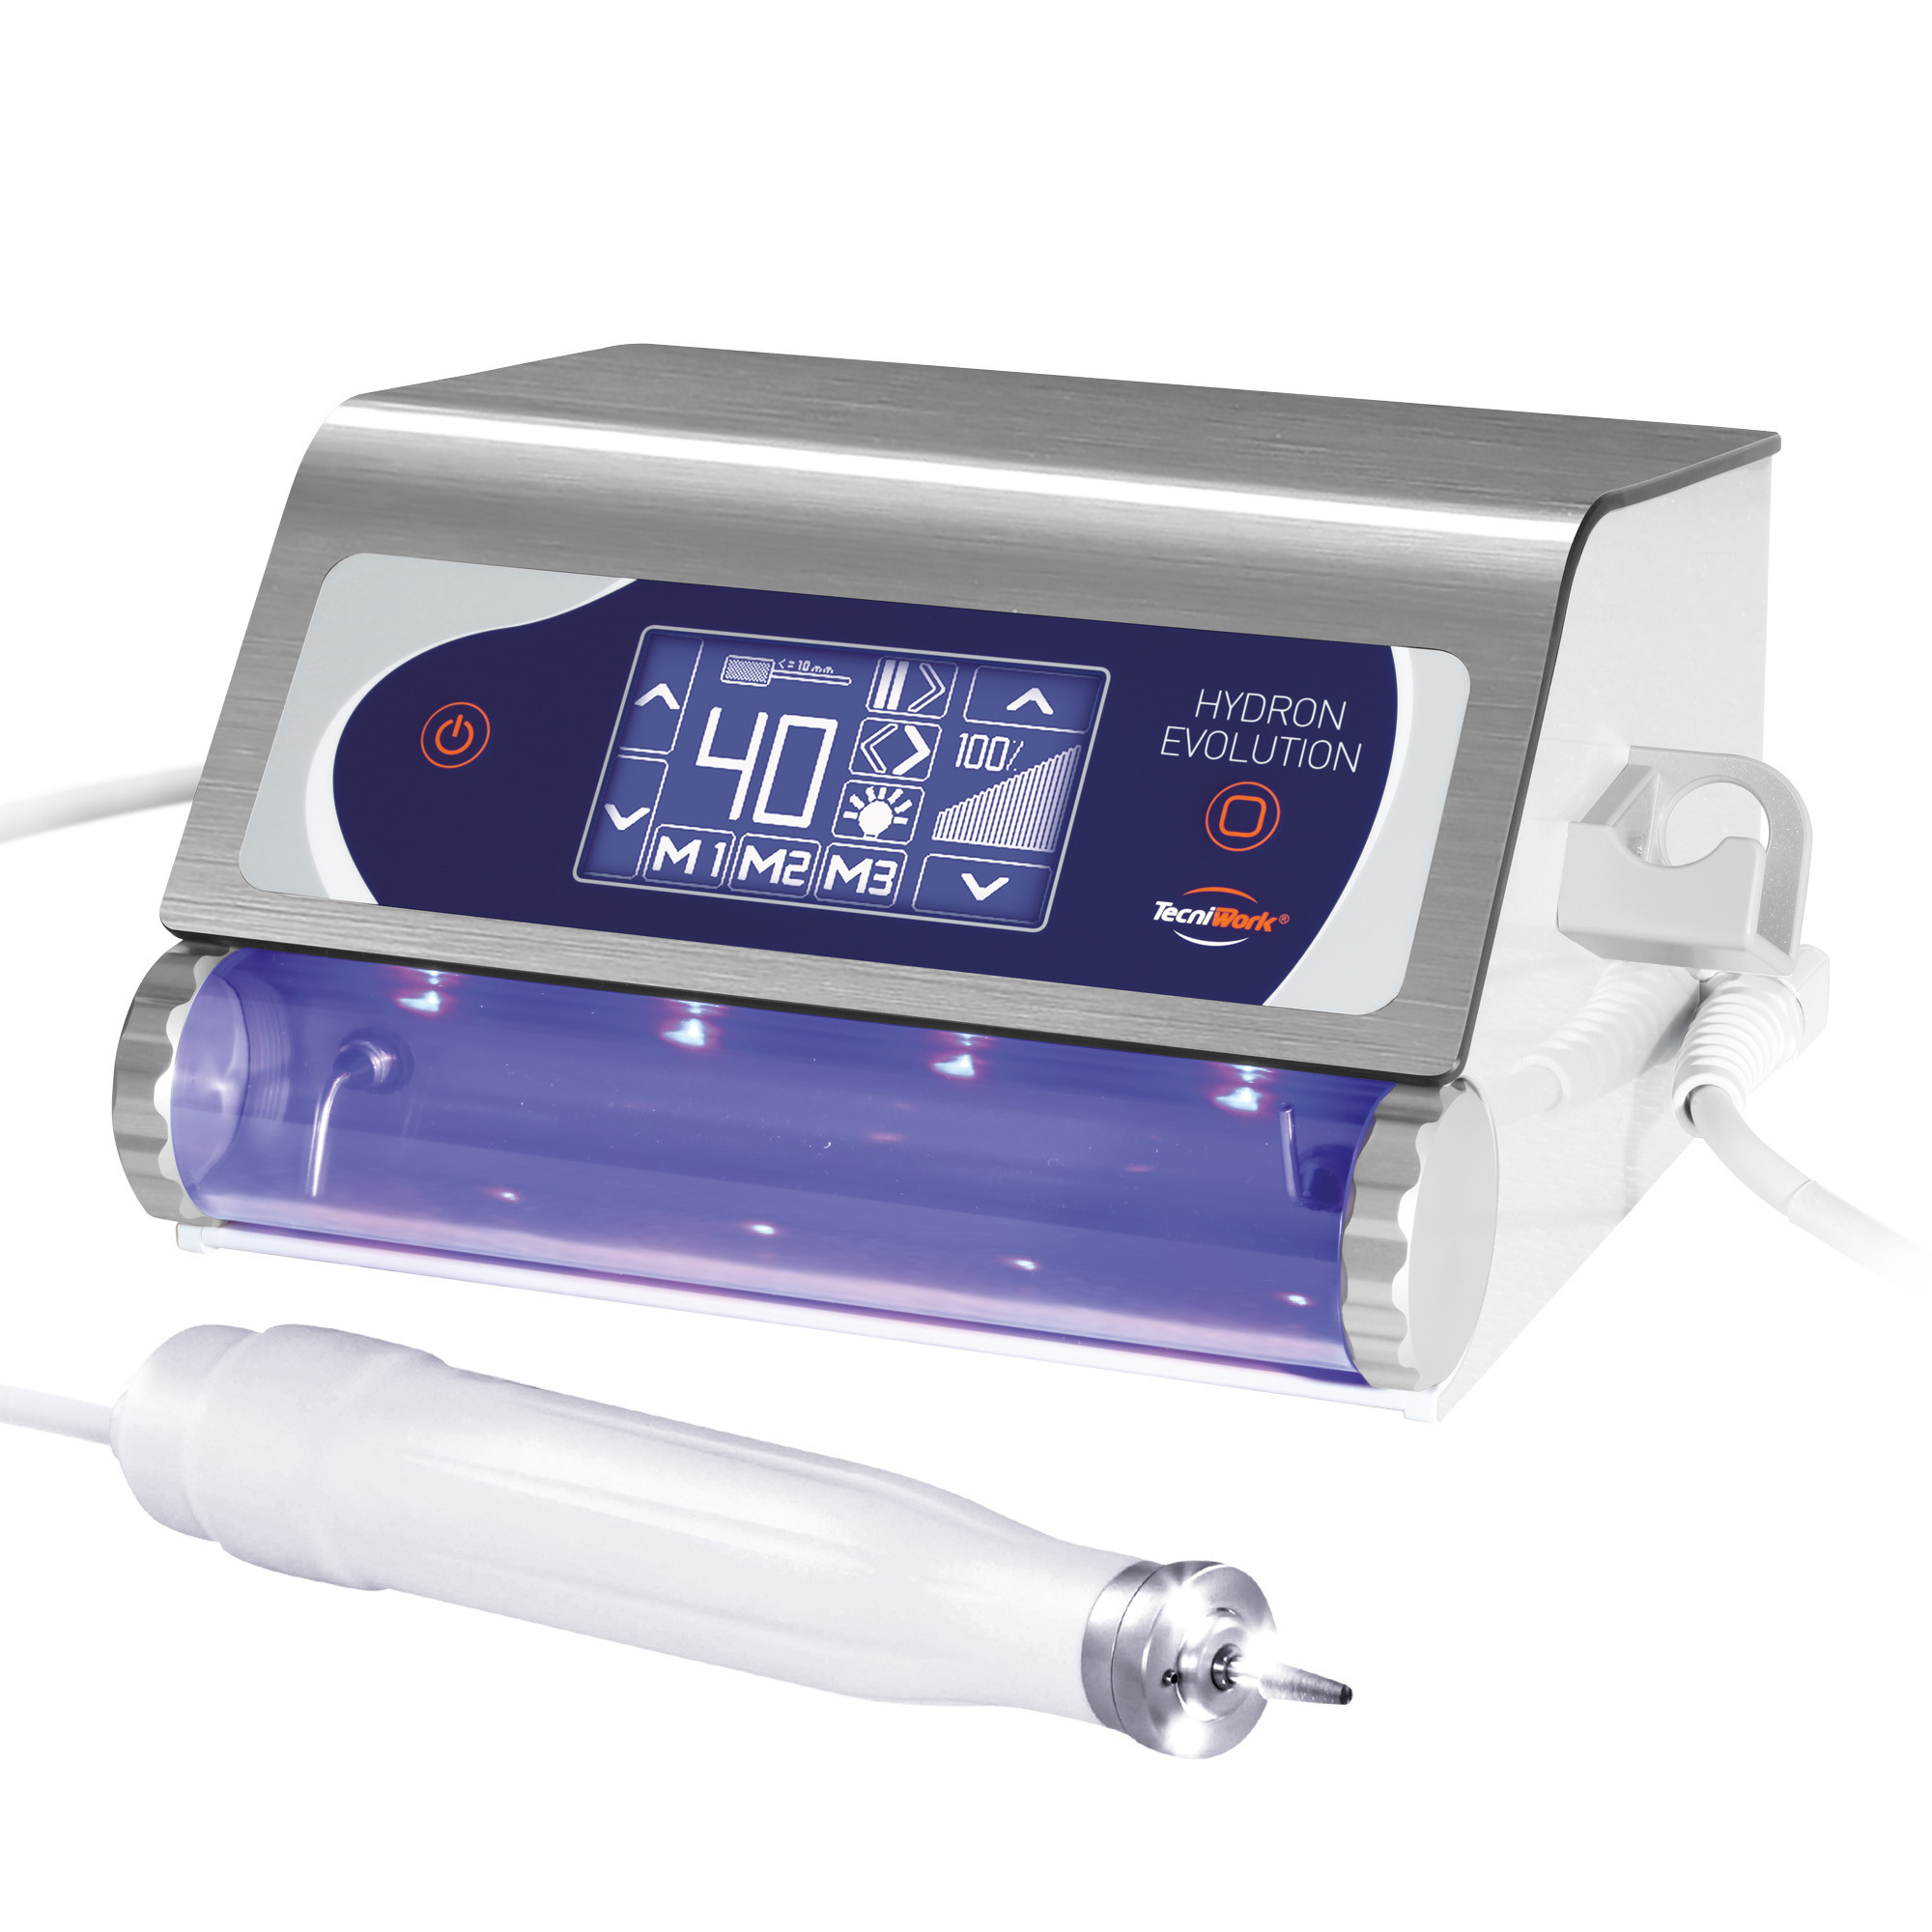 Hydron Evolution micromotor spray with digital display and led handpiece - Tecniwork